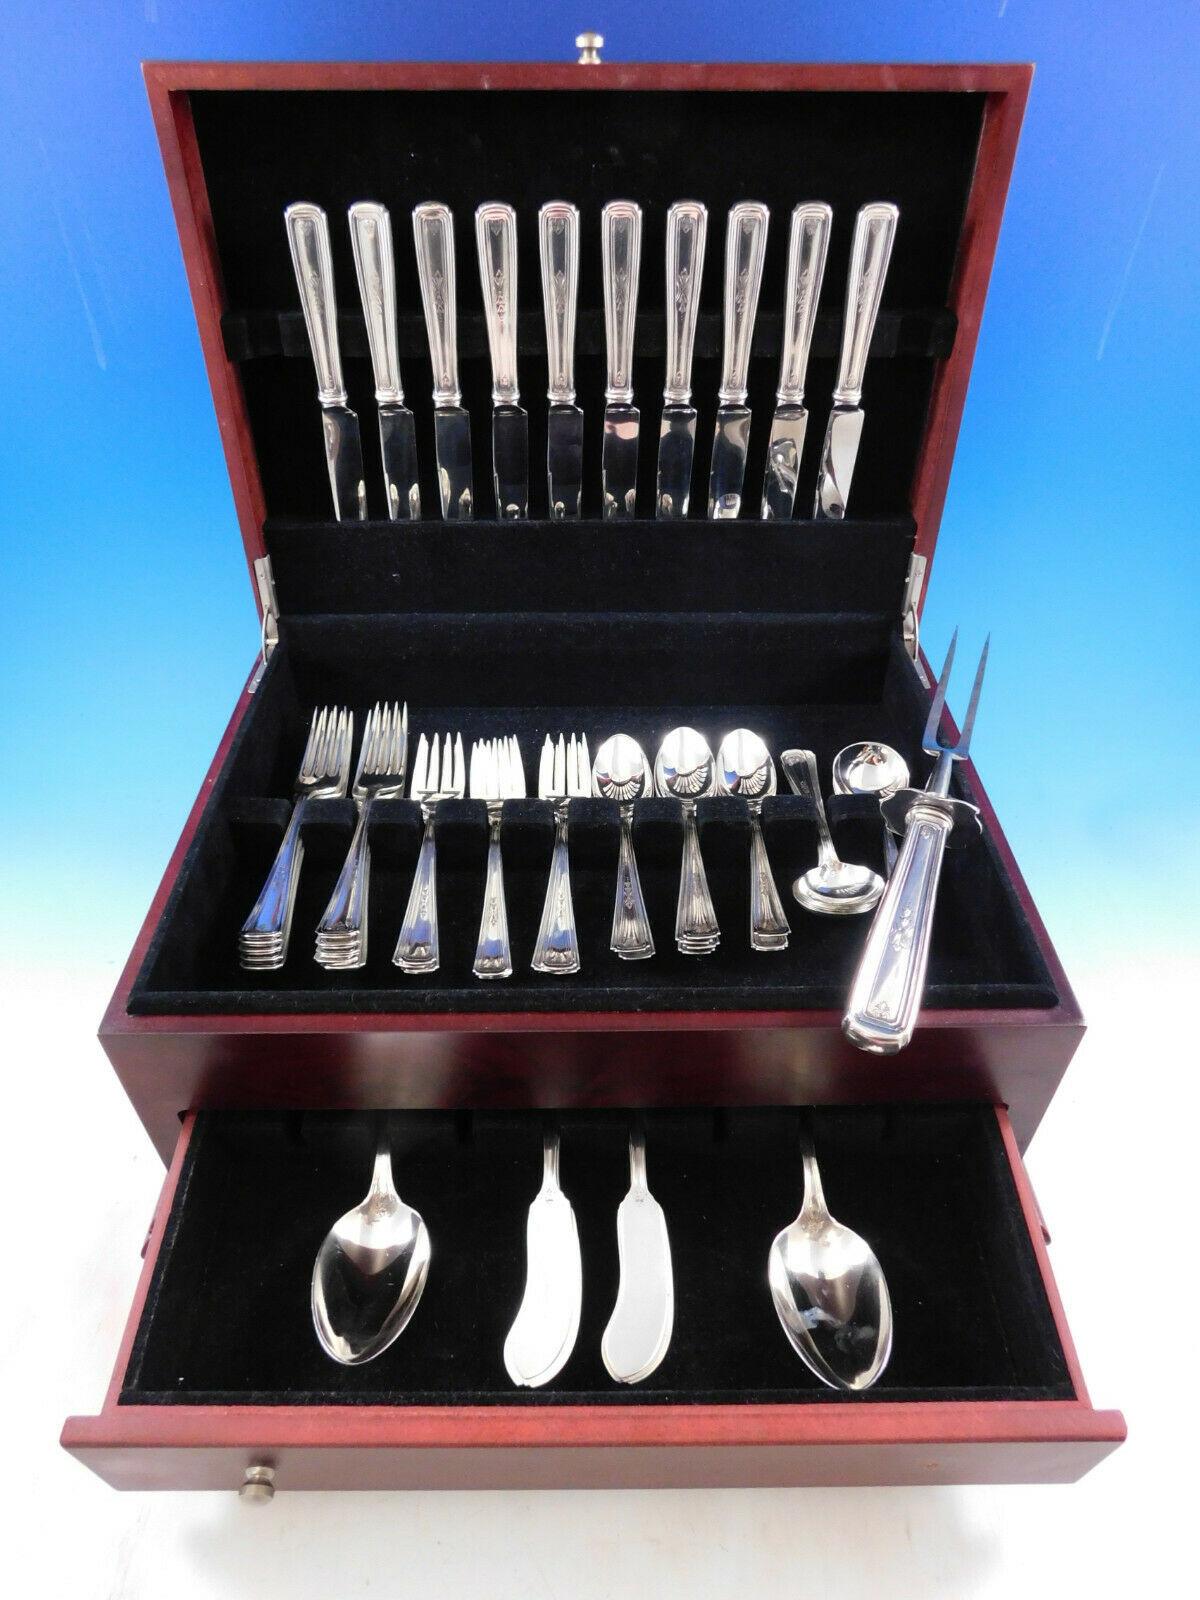 Livingston a engraved by Whiting sterling silver flatware set - 63 pieces. This scarce pattern was introduced in the year 1915. This set includes:

10 knives, 8 1/2